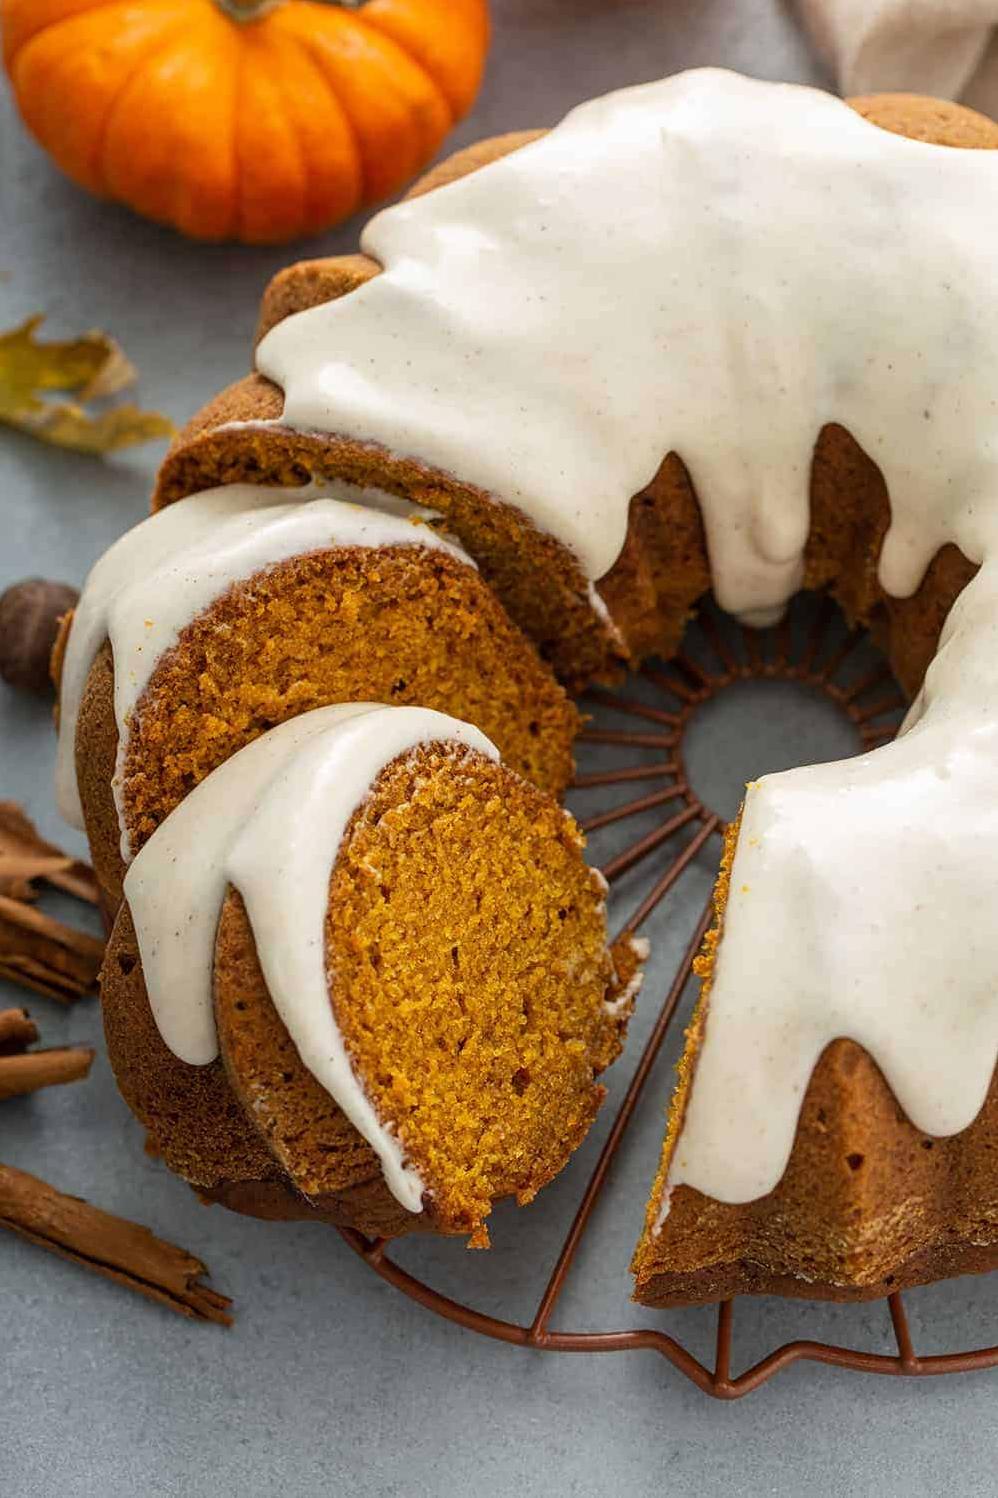  The perfect fall dessert: Pumpkin Pound Cake drizzled with caramel sauce!